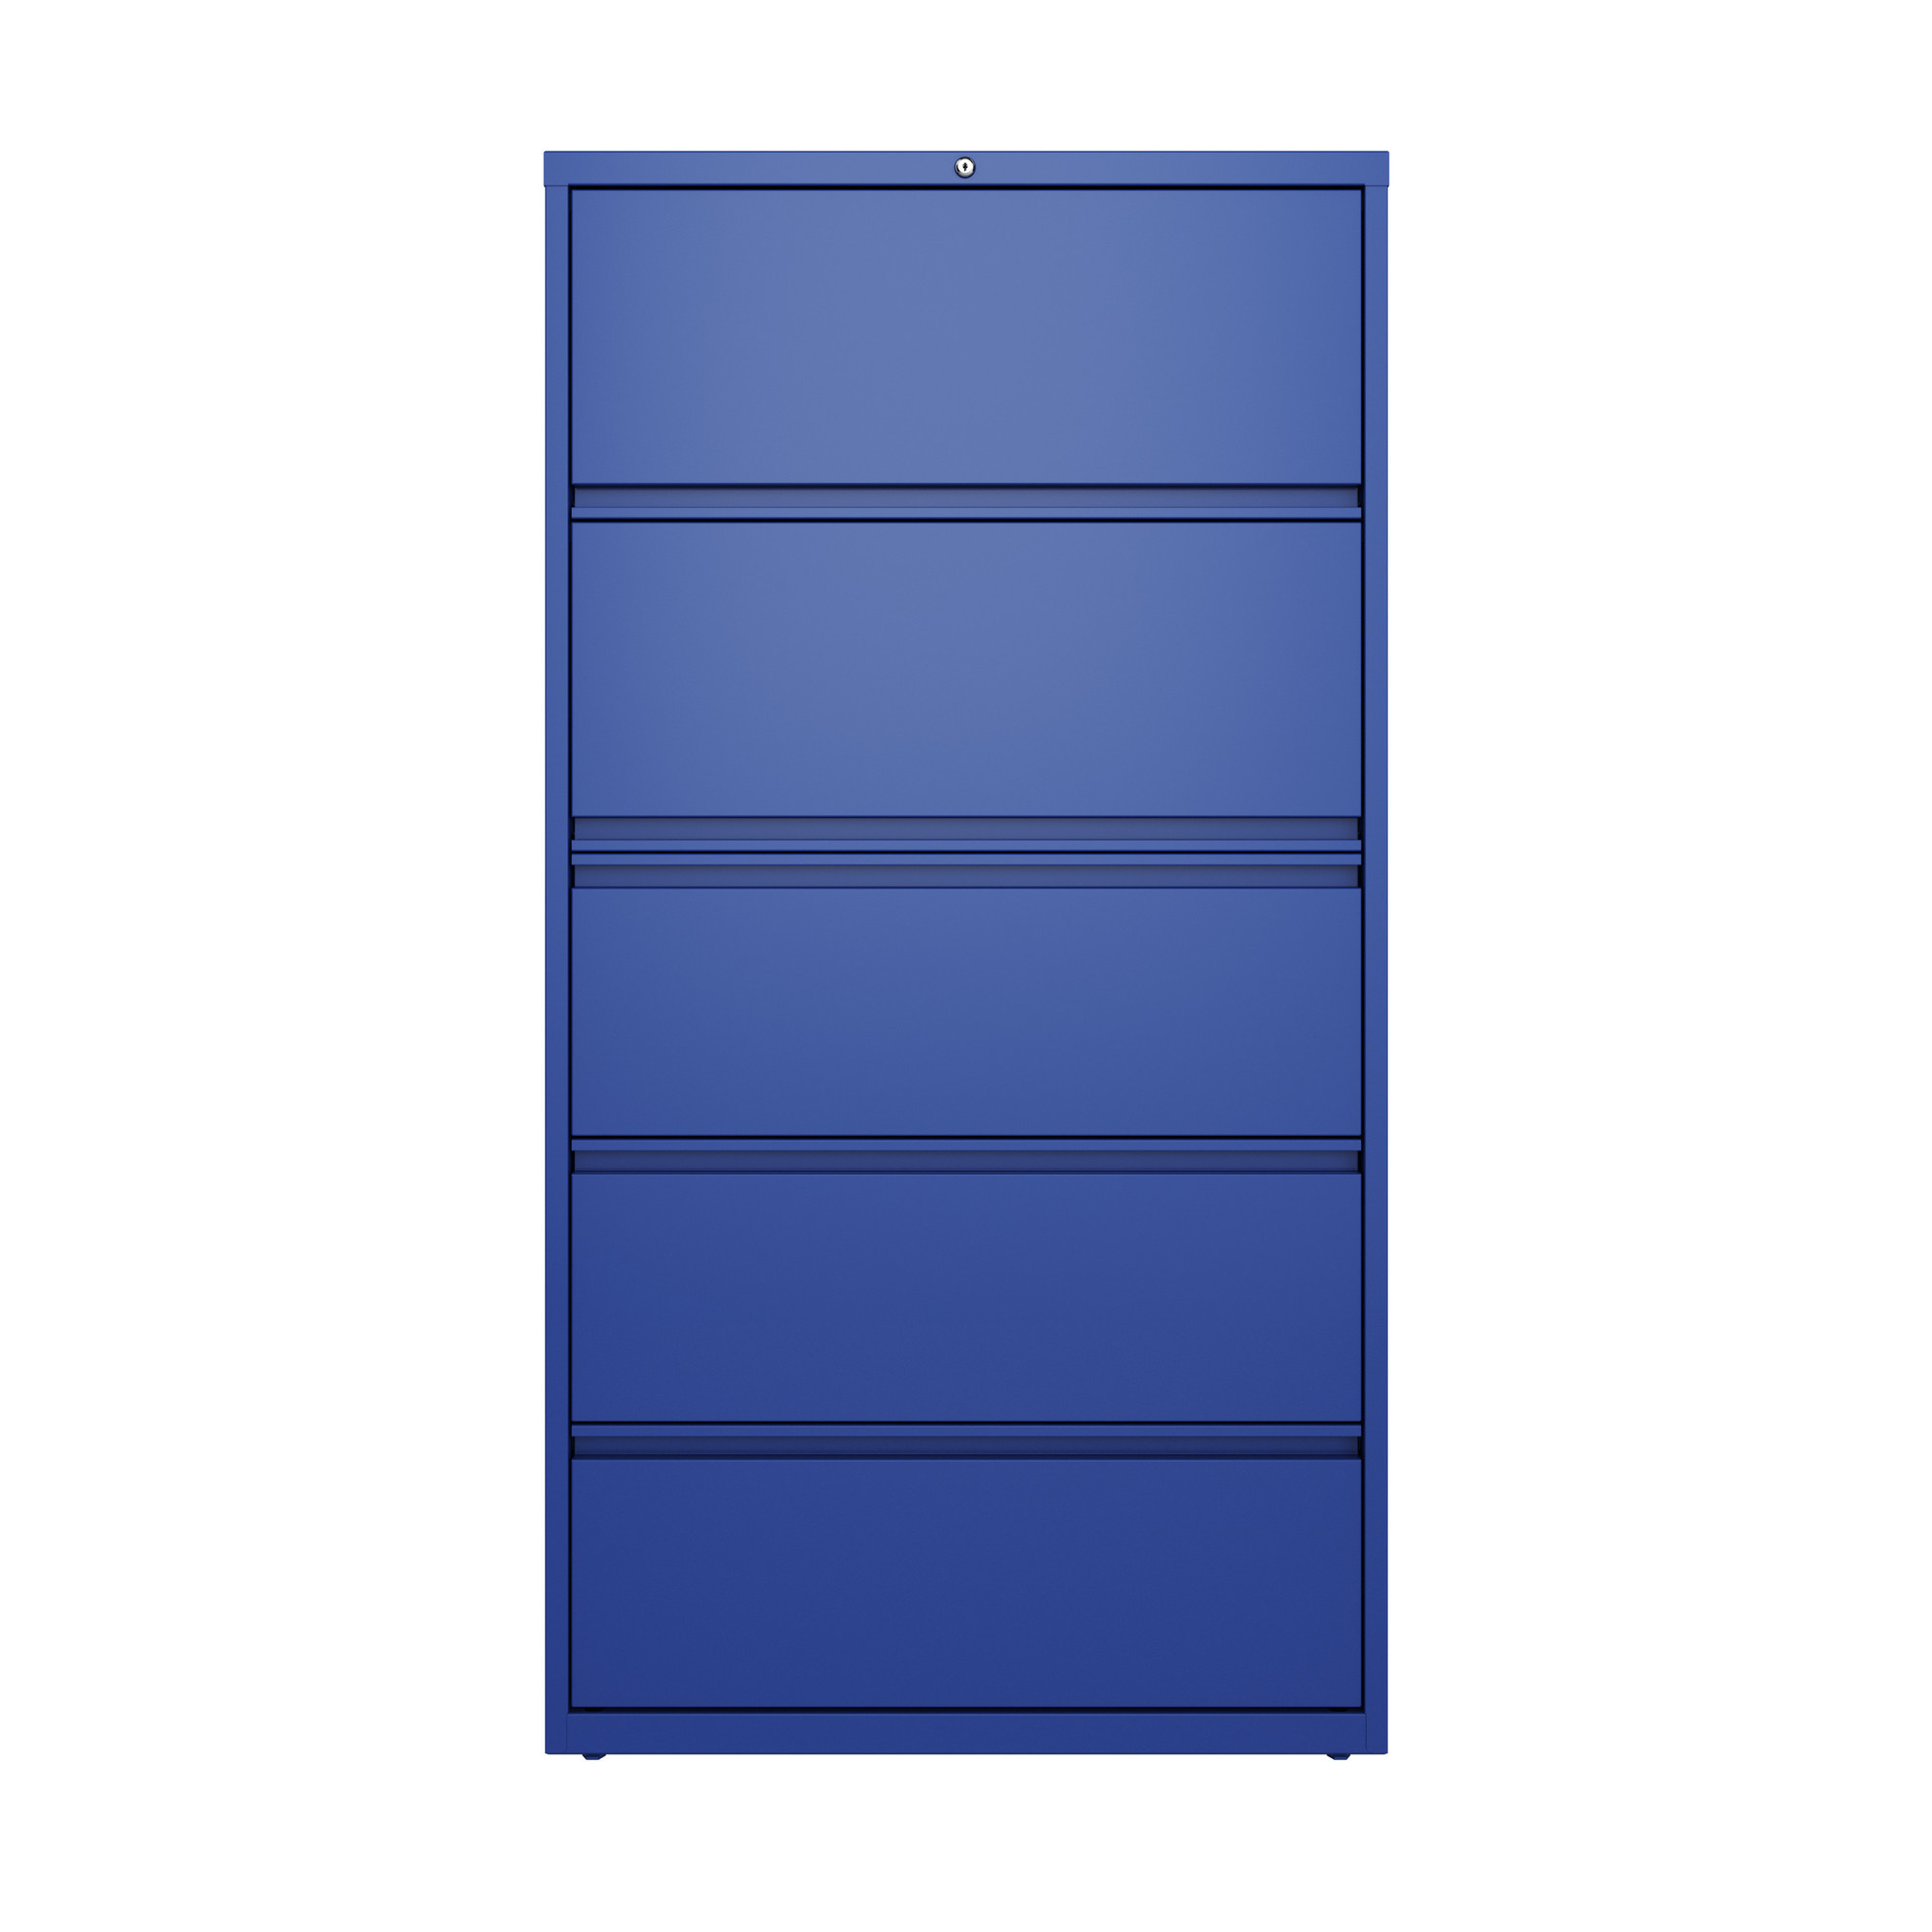 5 Drawer Lateral File Cabinet, Width 36 in, Depth 18.625 in, Height 67.625 in, Model - Hirsh Industries 24260